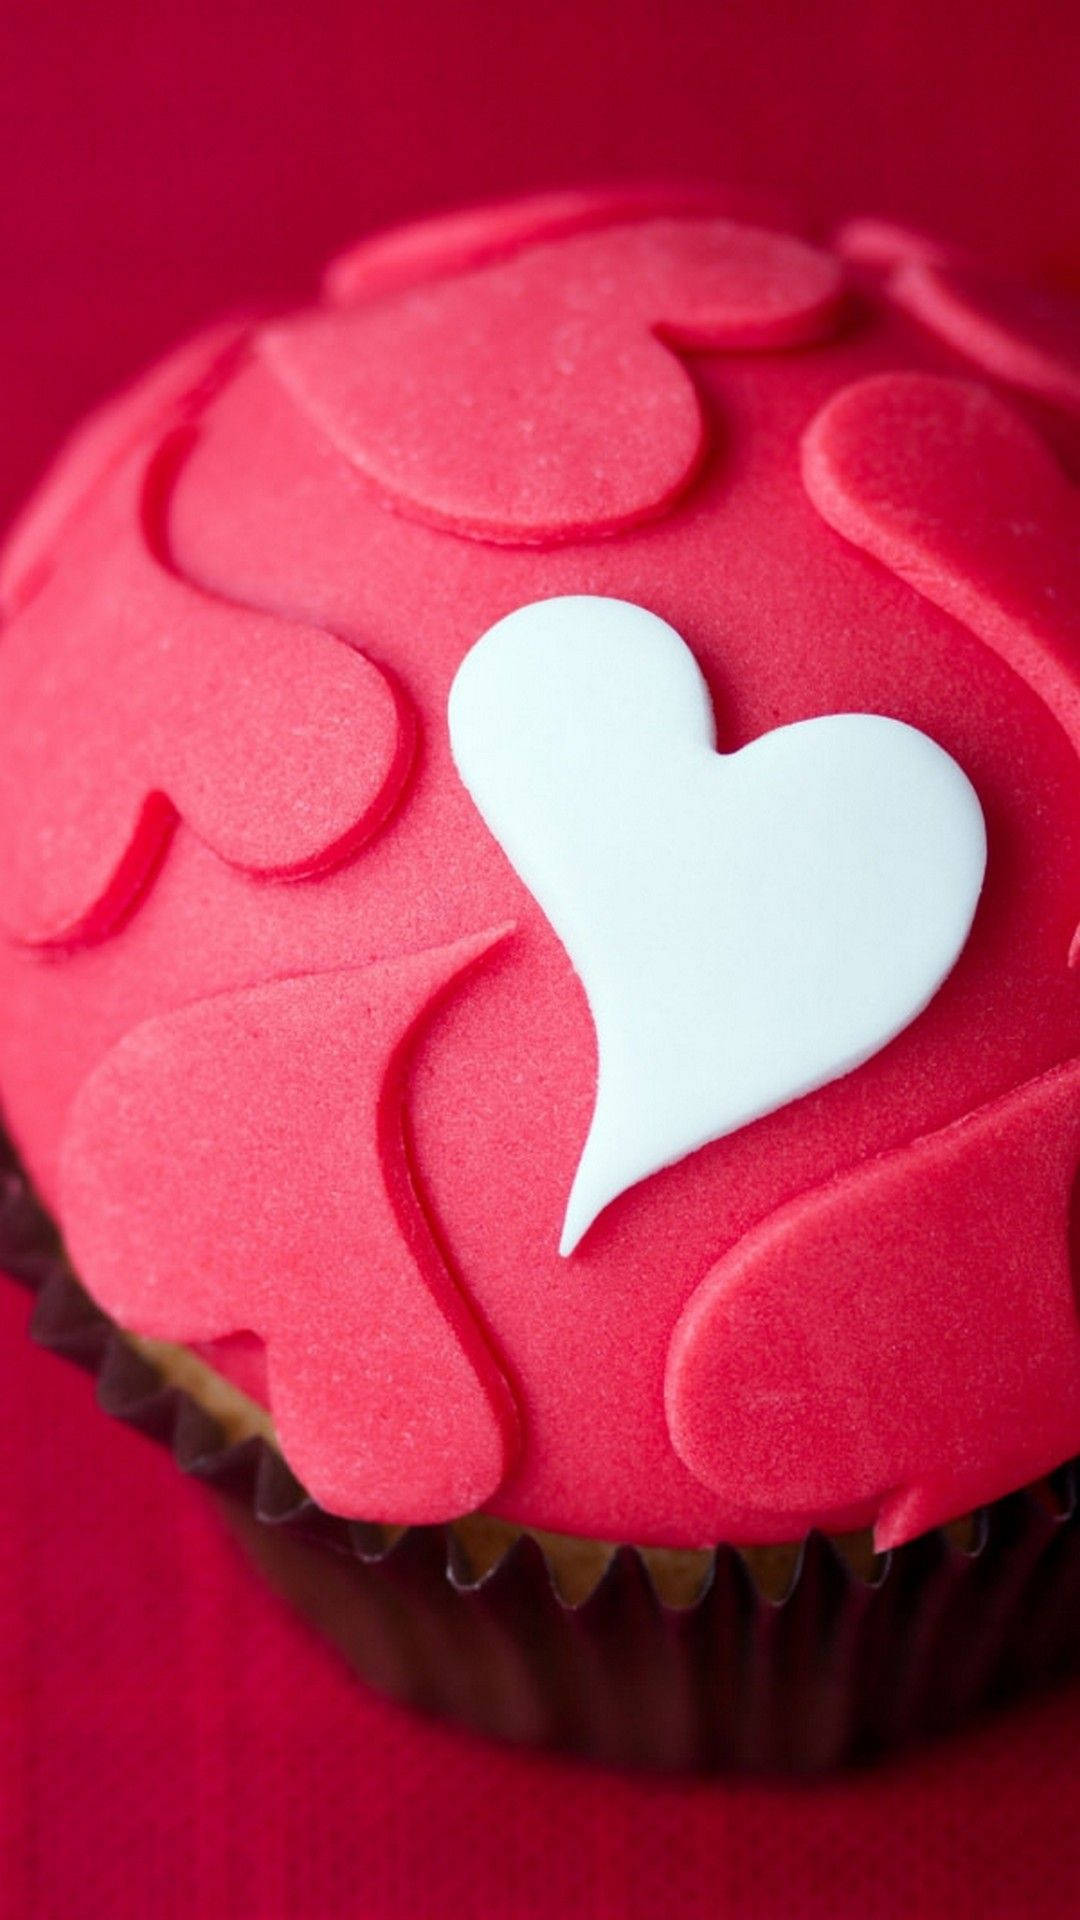 Søde Valentine Cupcakes Android Wallpaper Wallpaper